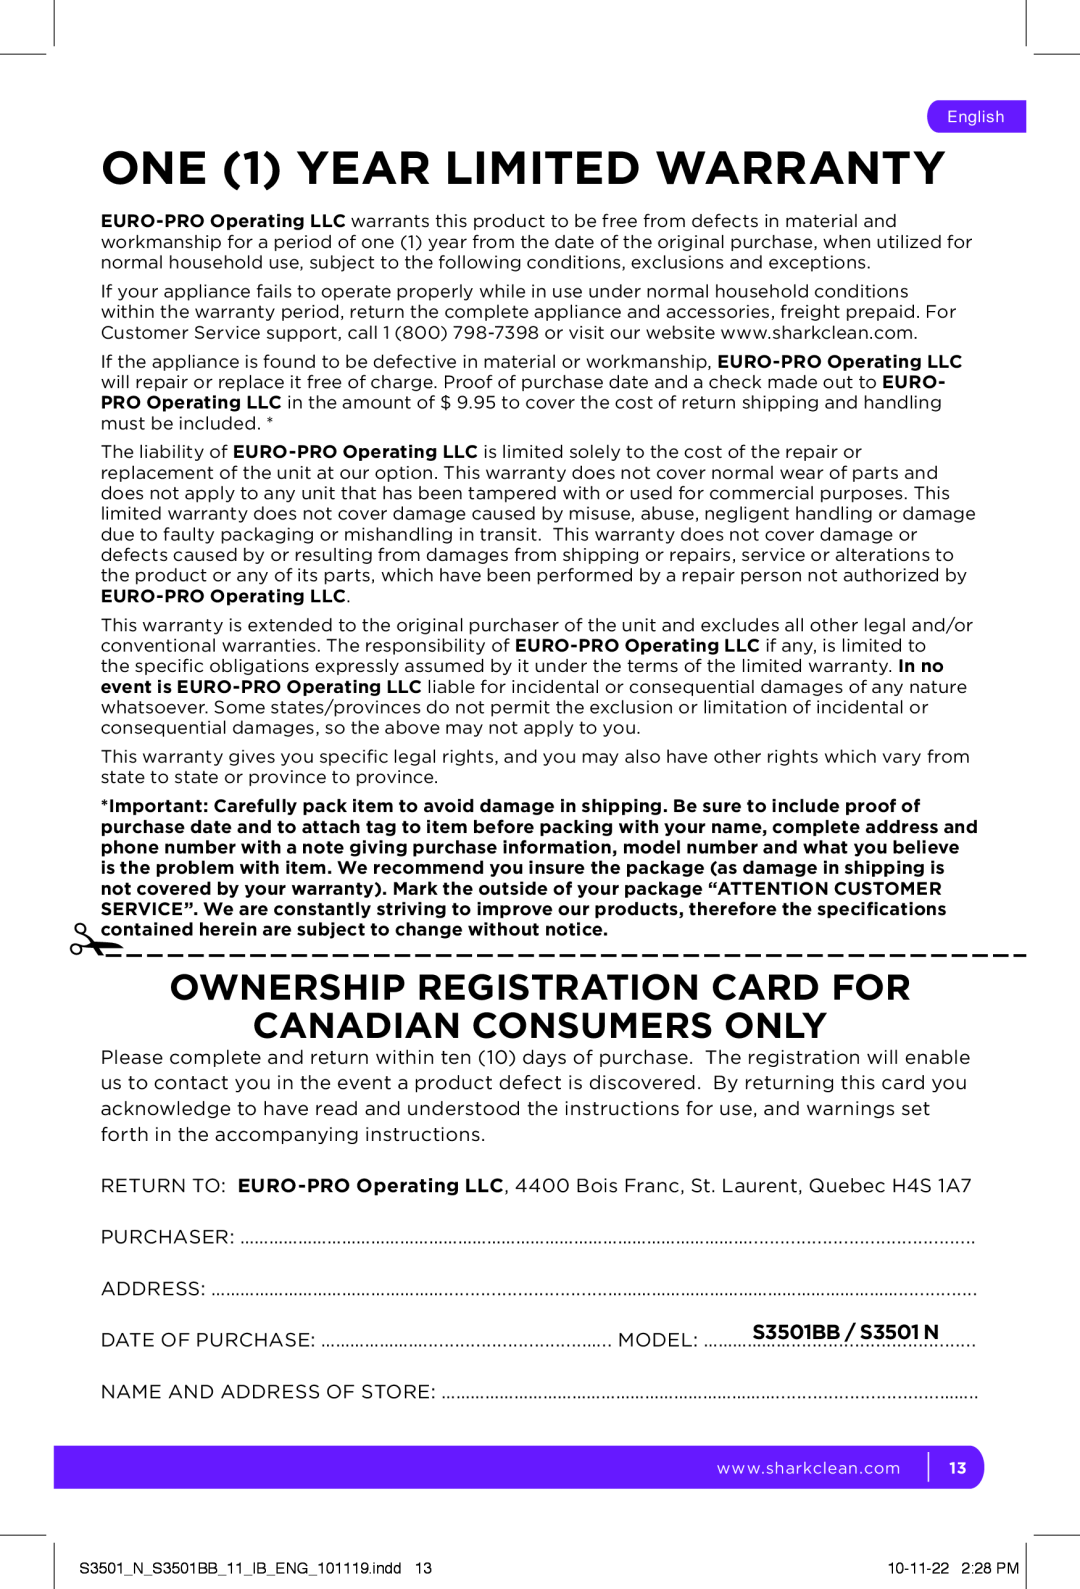 Shark manual Ownership Registration Card For Canadian Consumers Only, ONE 1 YEAR LIMITED WARRANTY, S3501BB / S3501 N 